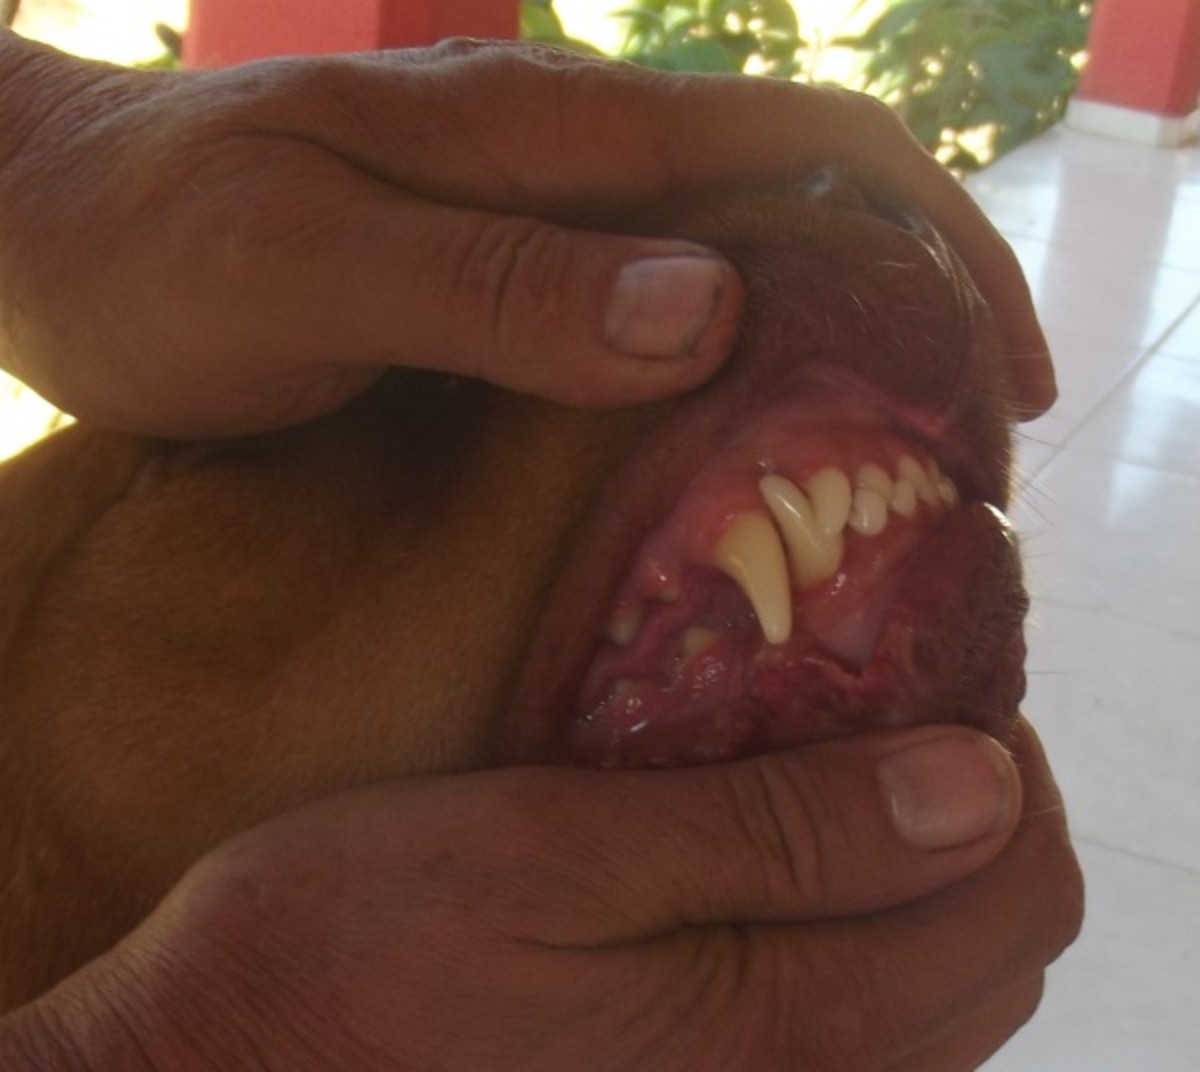 Check the mucus membrane of your dog after the bleeding has stopped; remember to always know what is normal for your dog.